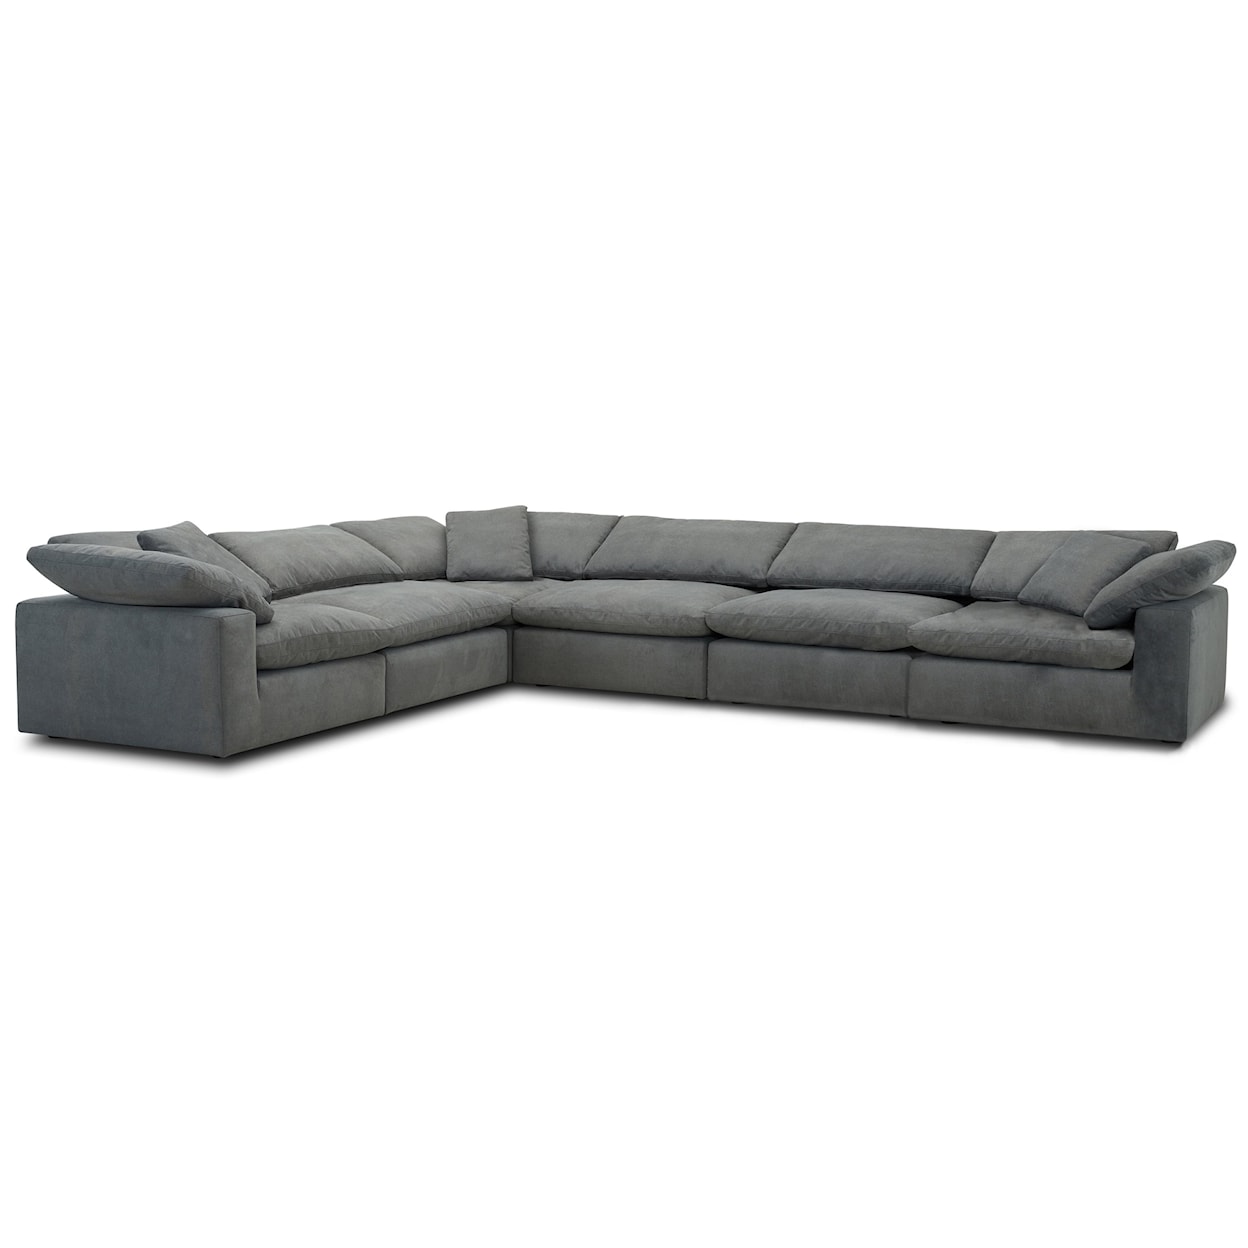 Parker Living Exhale - Mathis Thunder Sectional Sofa